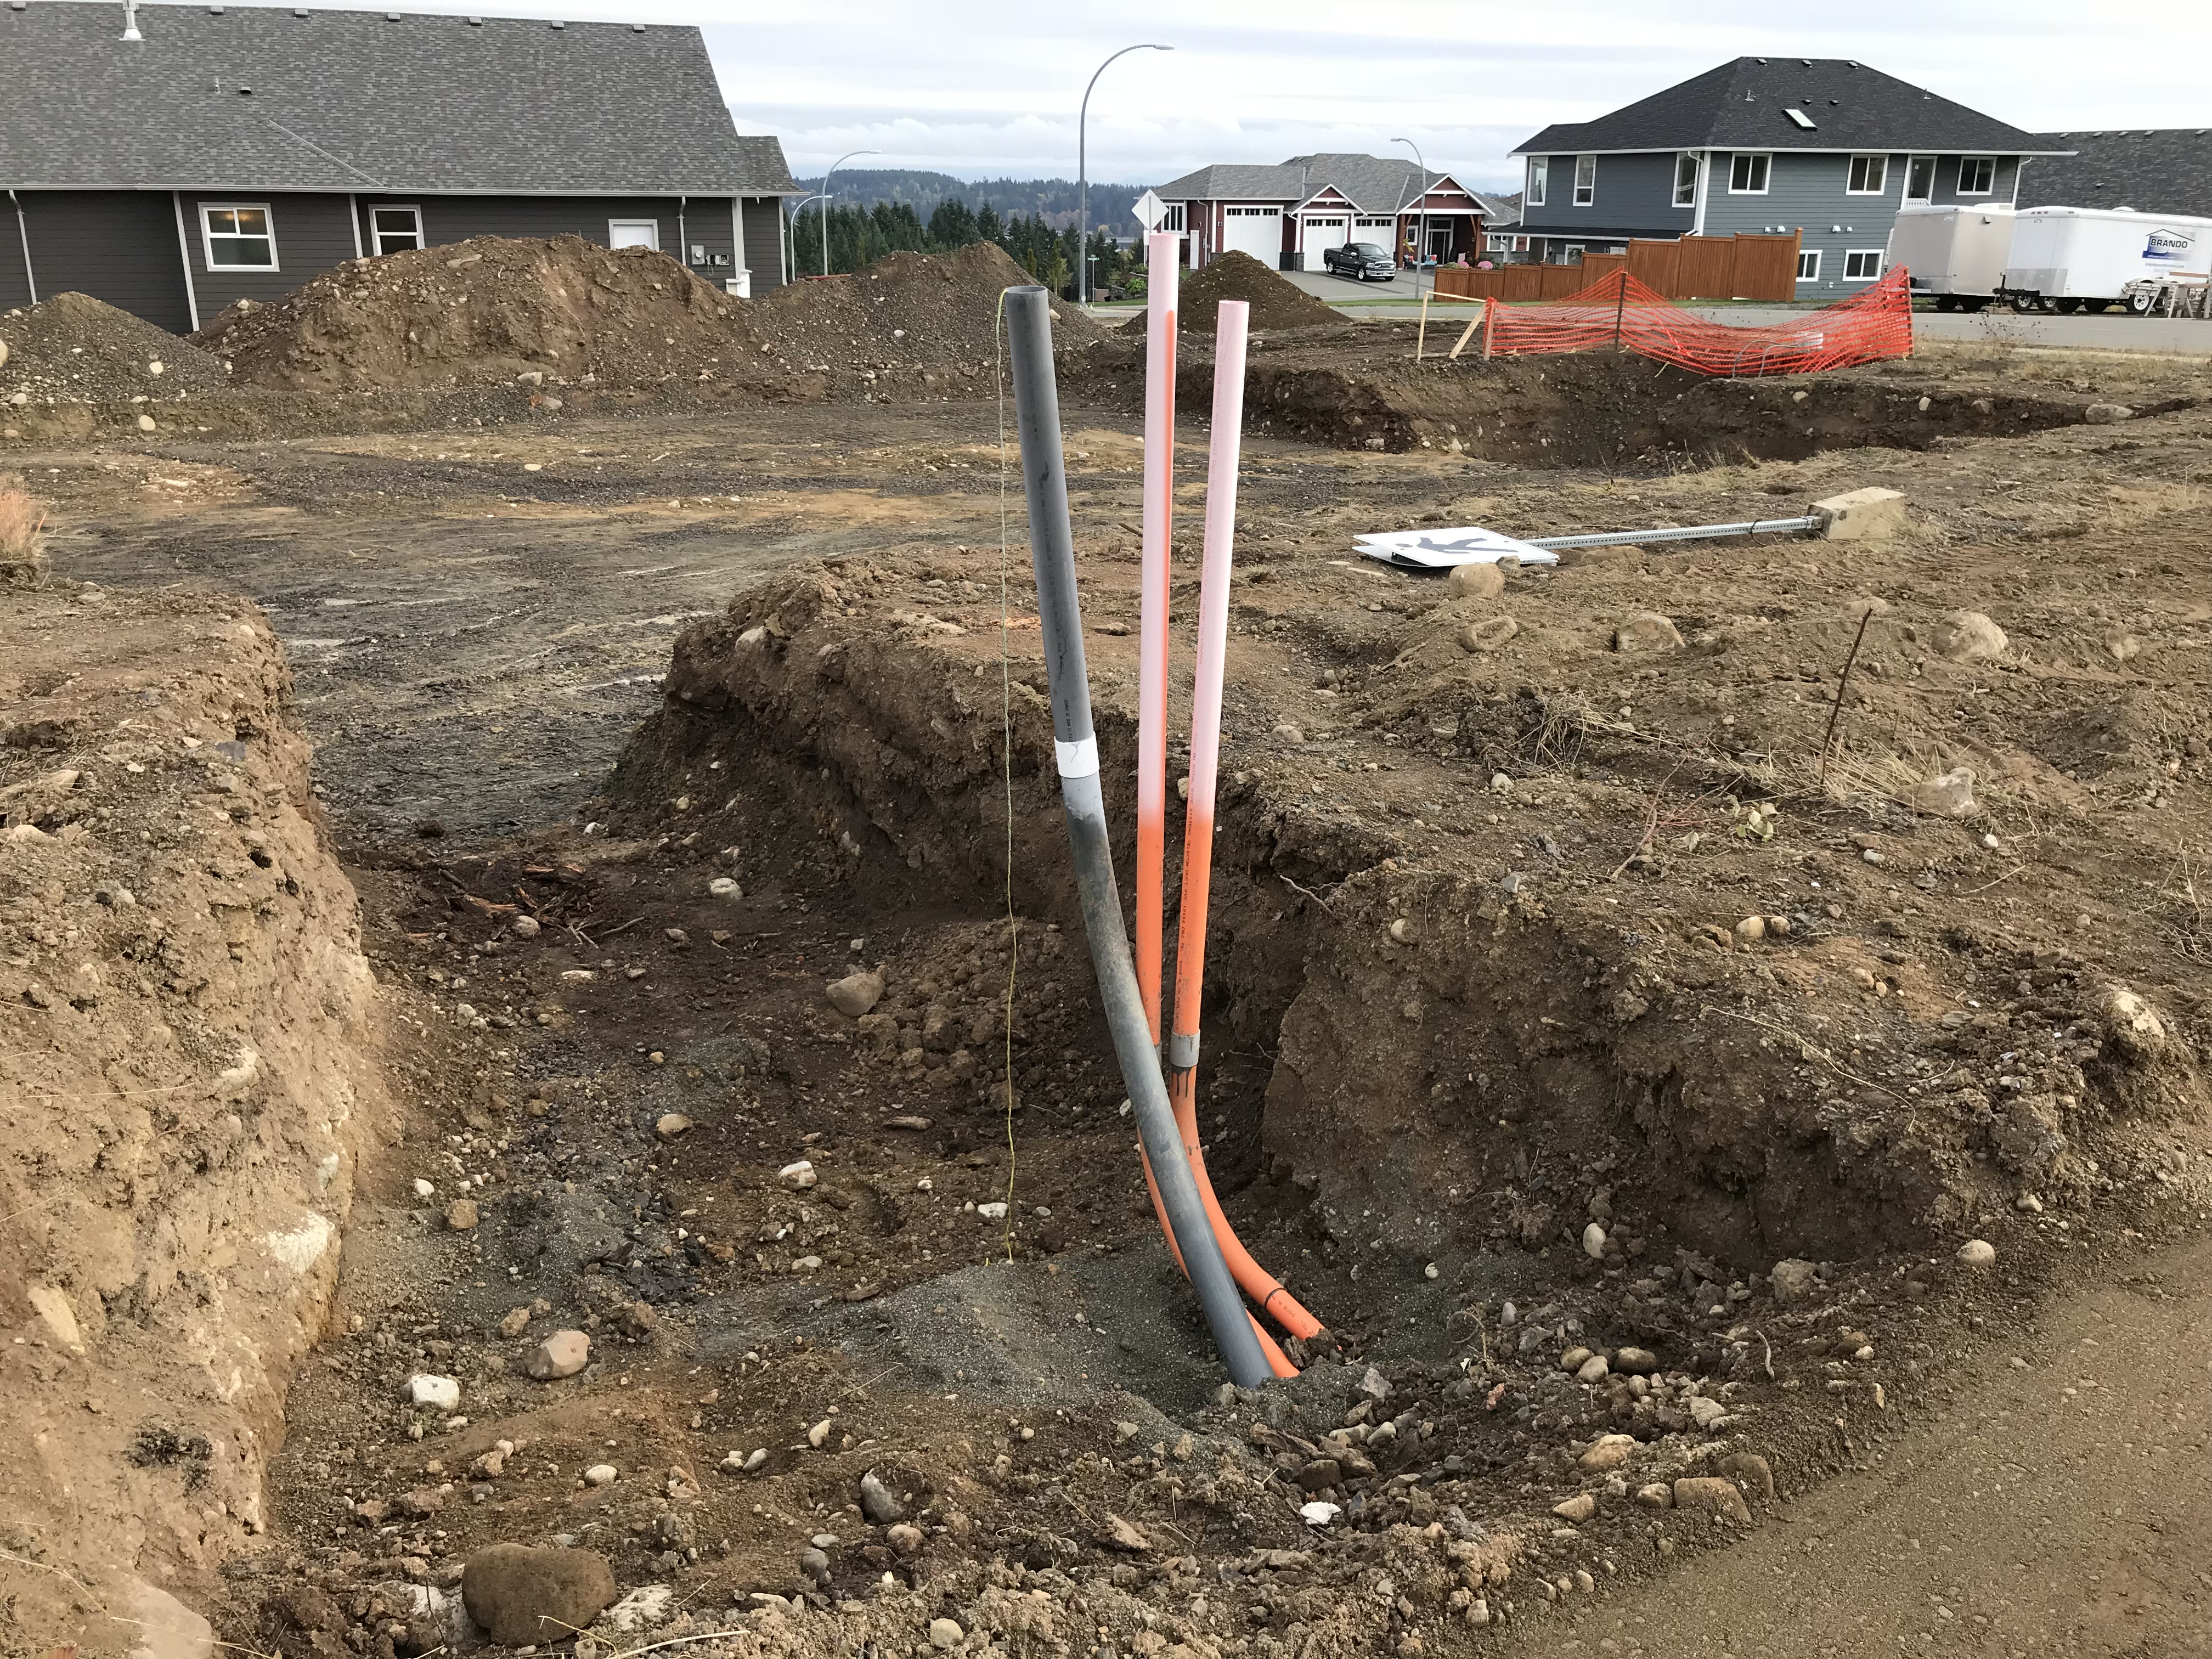 pic of power feed to a new lot in the Ridge subdivision - life as an electrician in the comox valley means driving around to check on new job sites